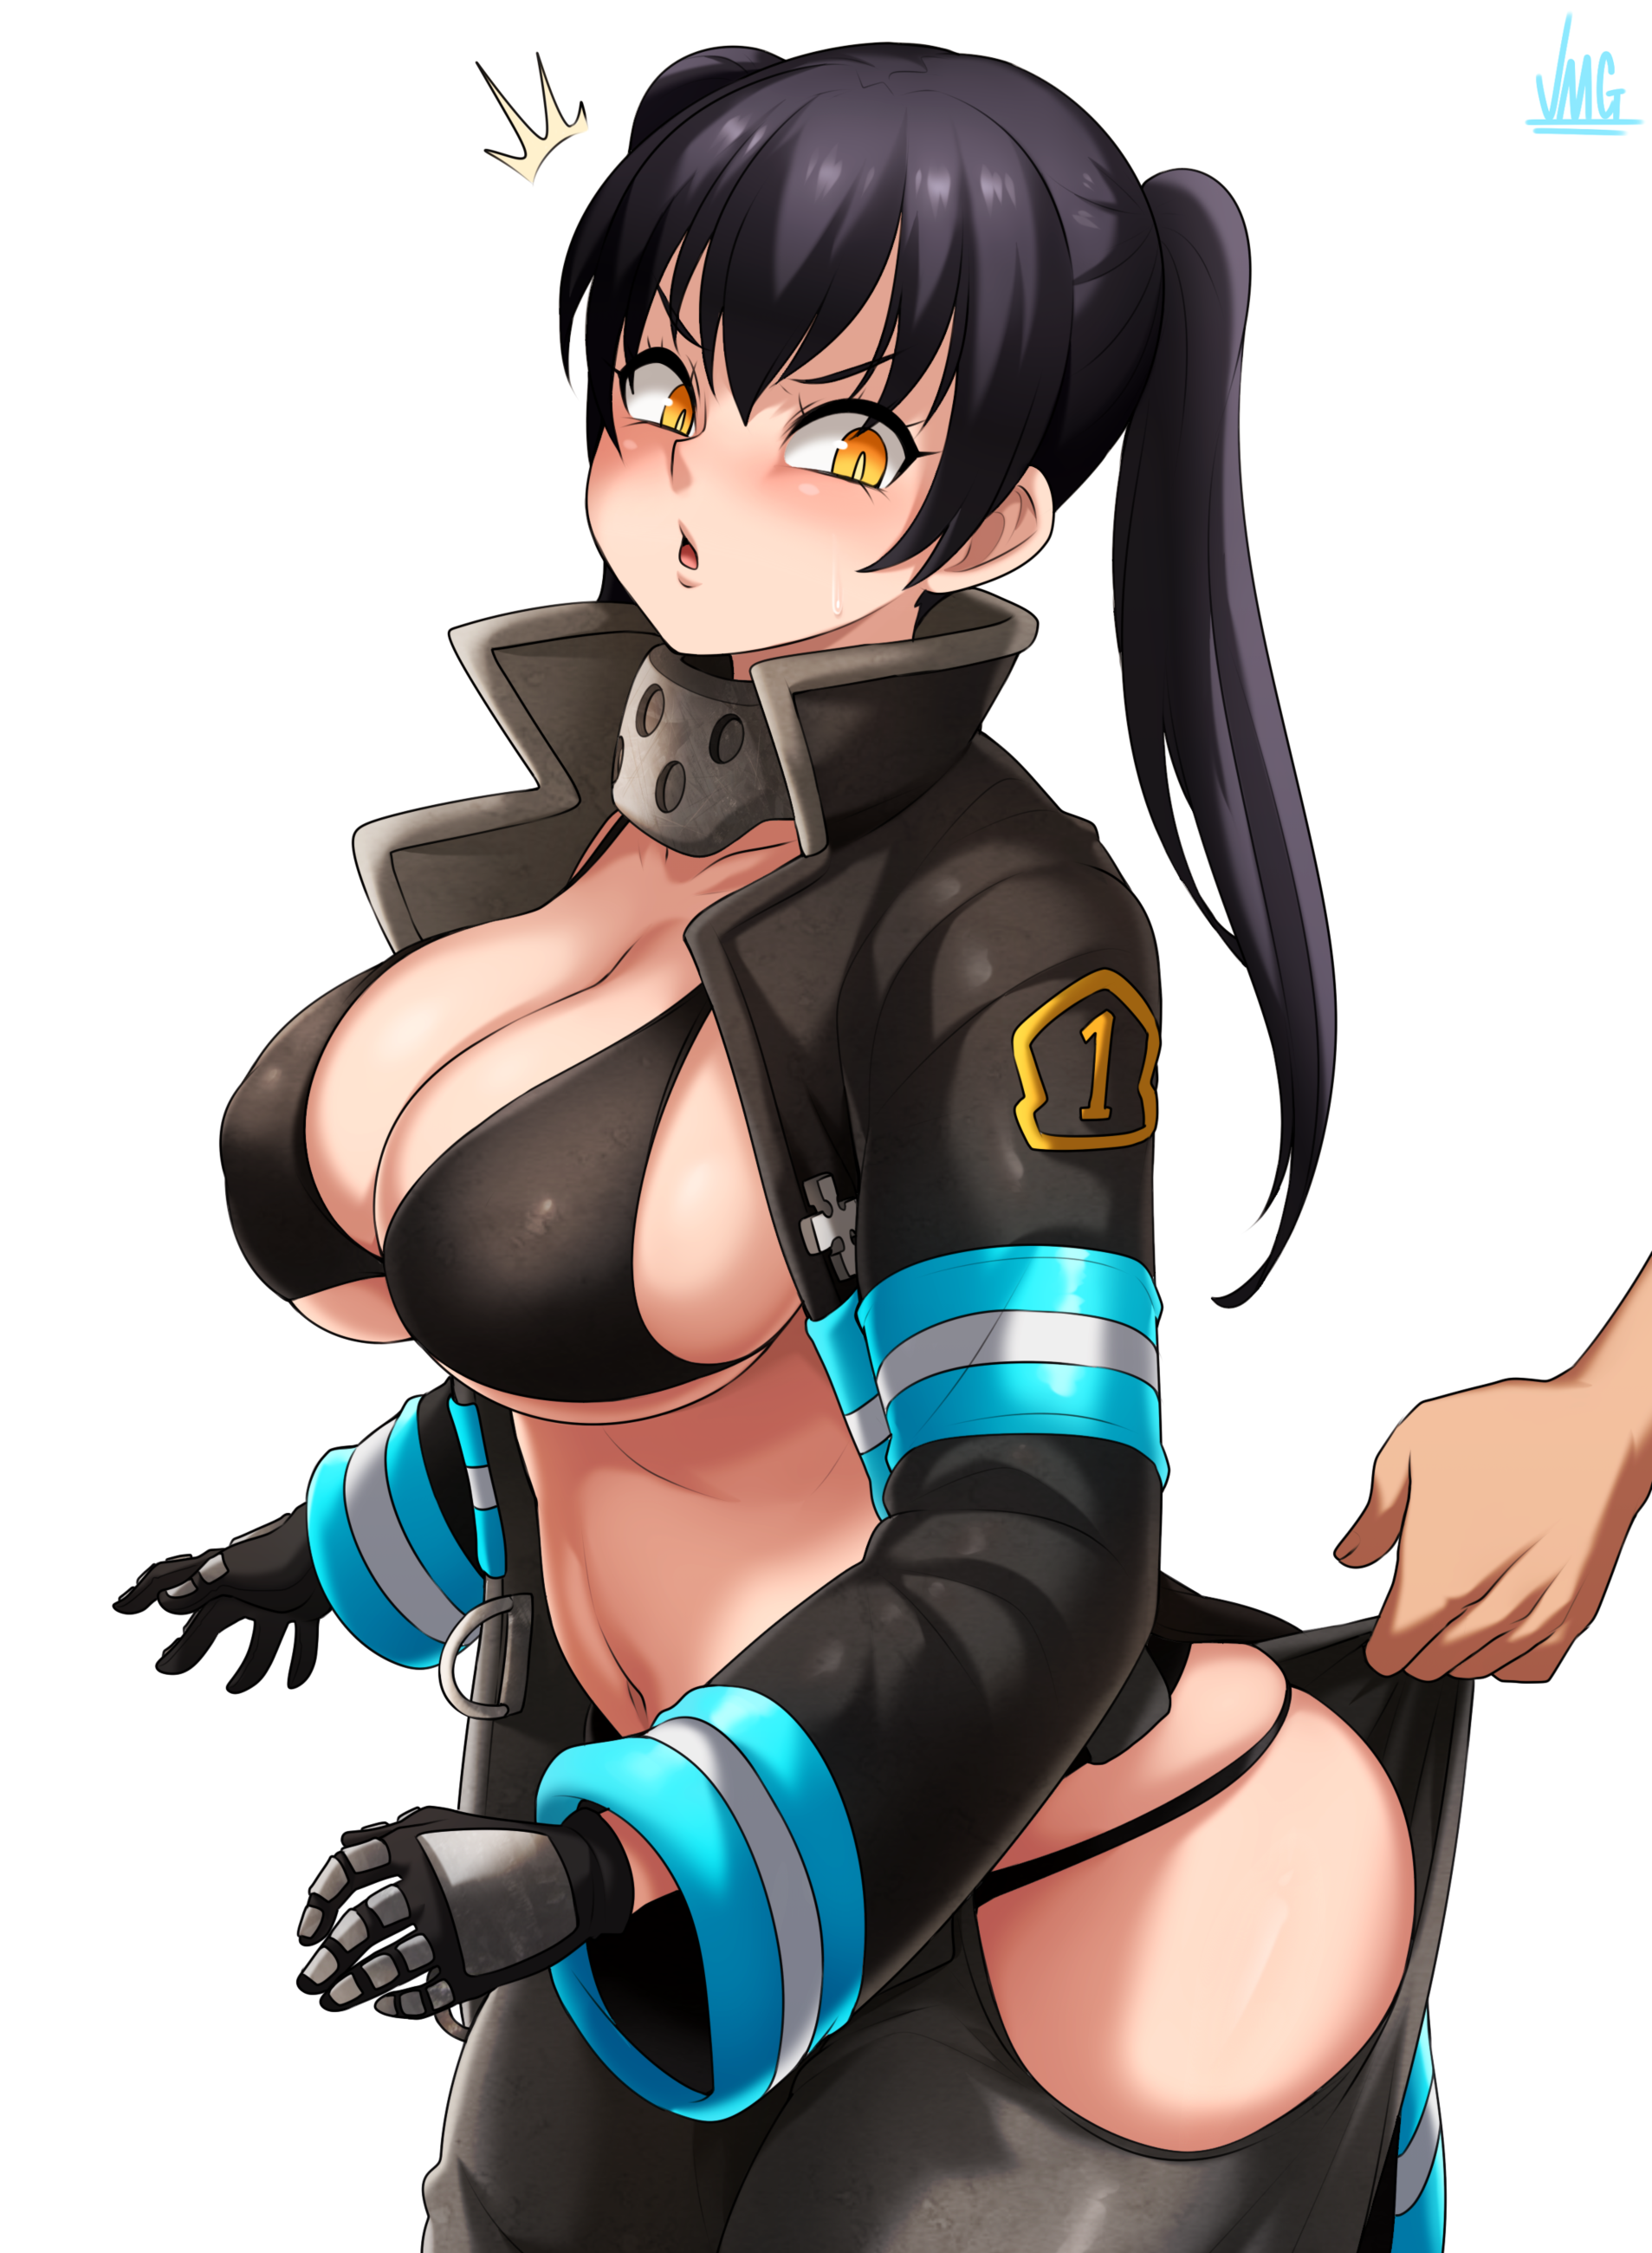 Anime 1907x2600 Enen no Shouboutai JK firefighers black bikinis black coat big boobs twintails wide breasts wide hips anime girls belly button thighs the gap long hair black hair cleavage sideboob ass glutes portrait display Tamaki Kotatsu ecchi hanging boobs belly looking away thick thigh thick ass open mouth orange eyes fan art simple background embarrassed curvy arched back big areolae anime